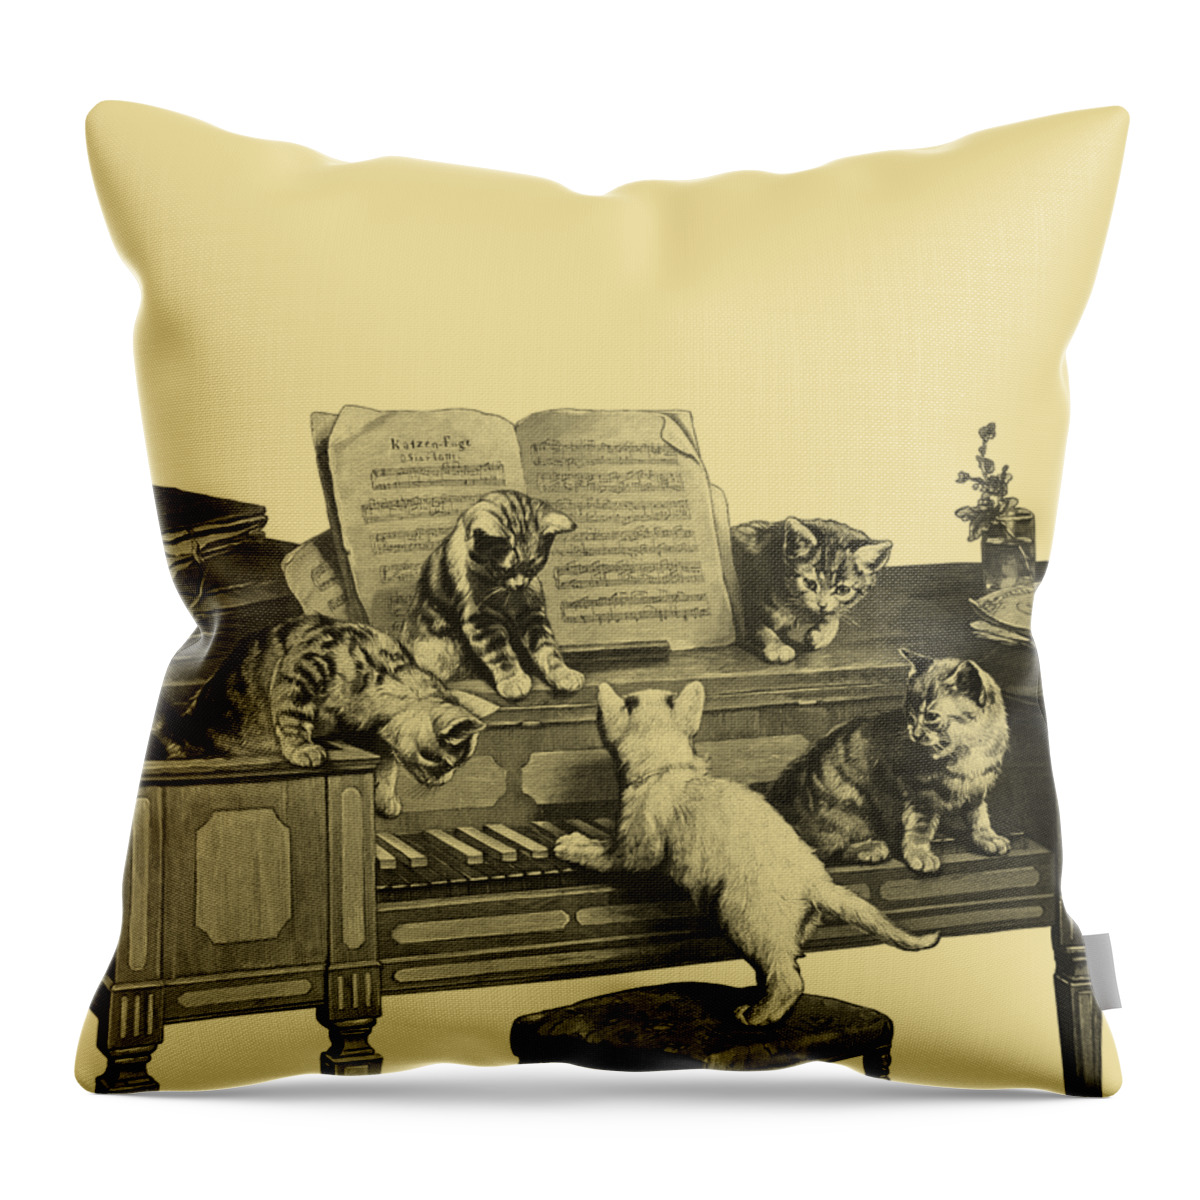 Kitten Throw Pillow featuring the digital art Kittens And Piano by Madame Memento